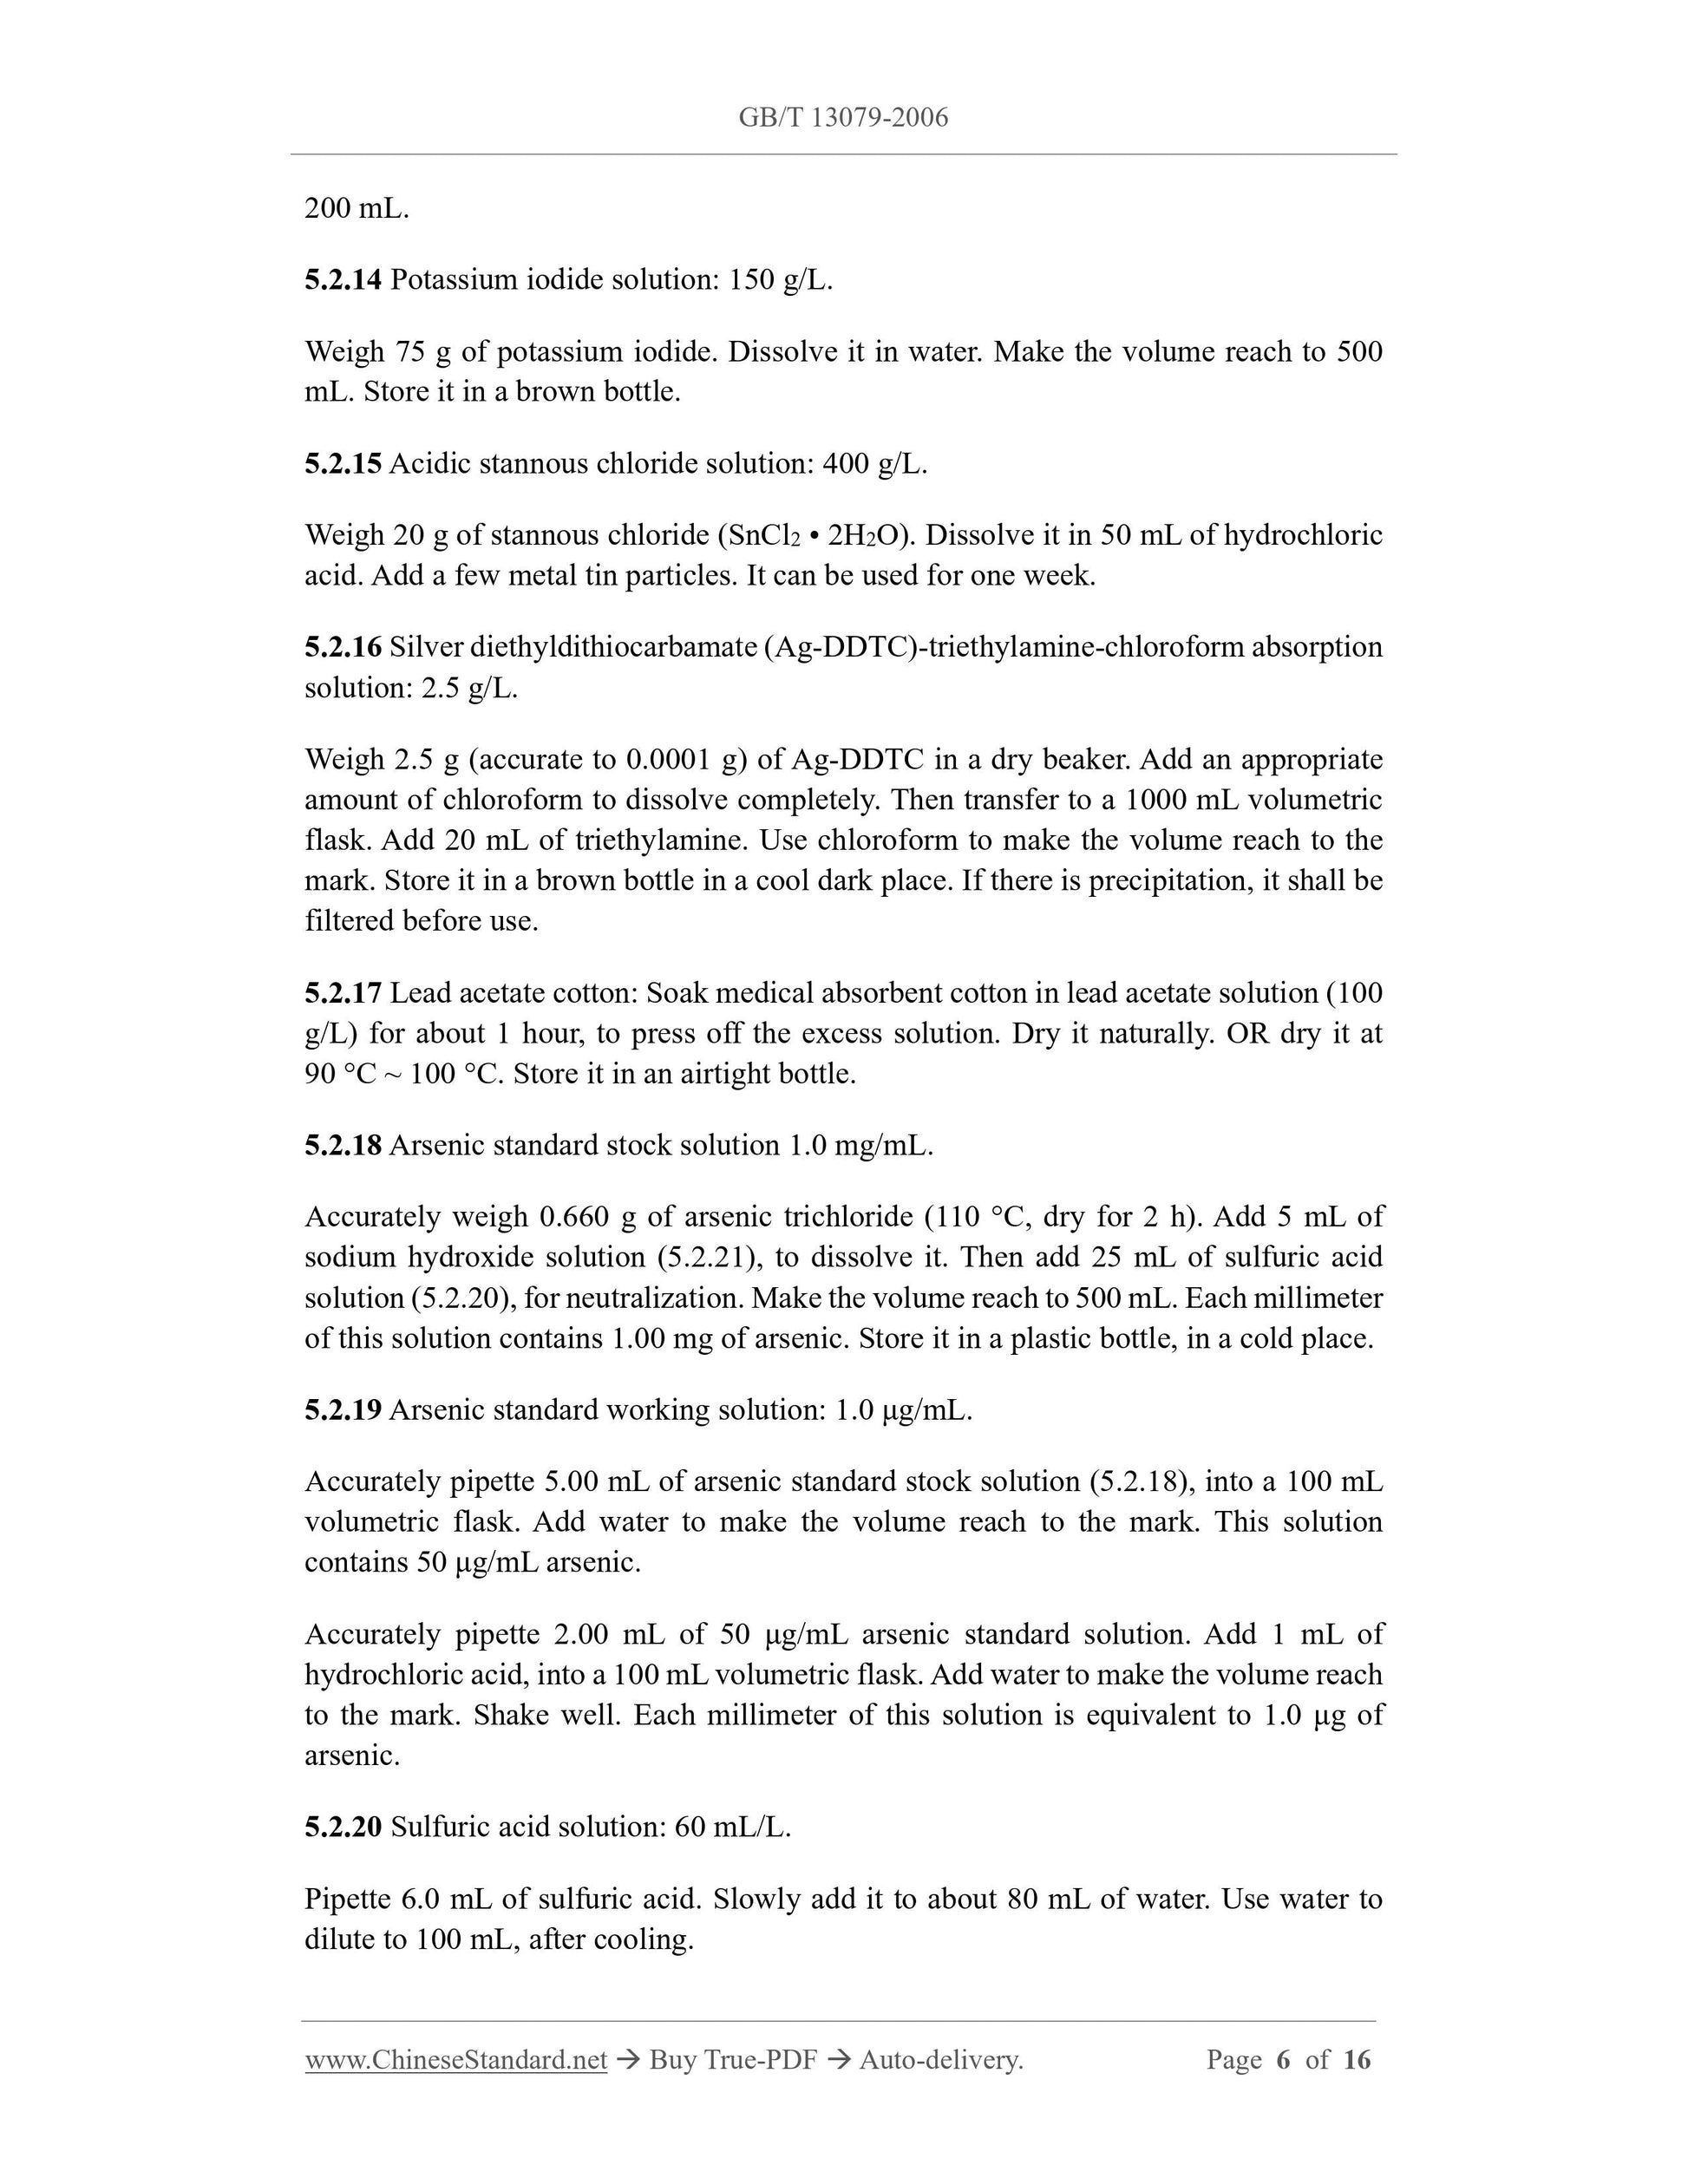 GB/T 13079-2006 Page 5